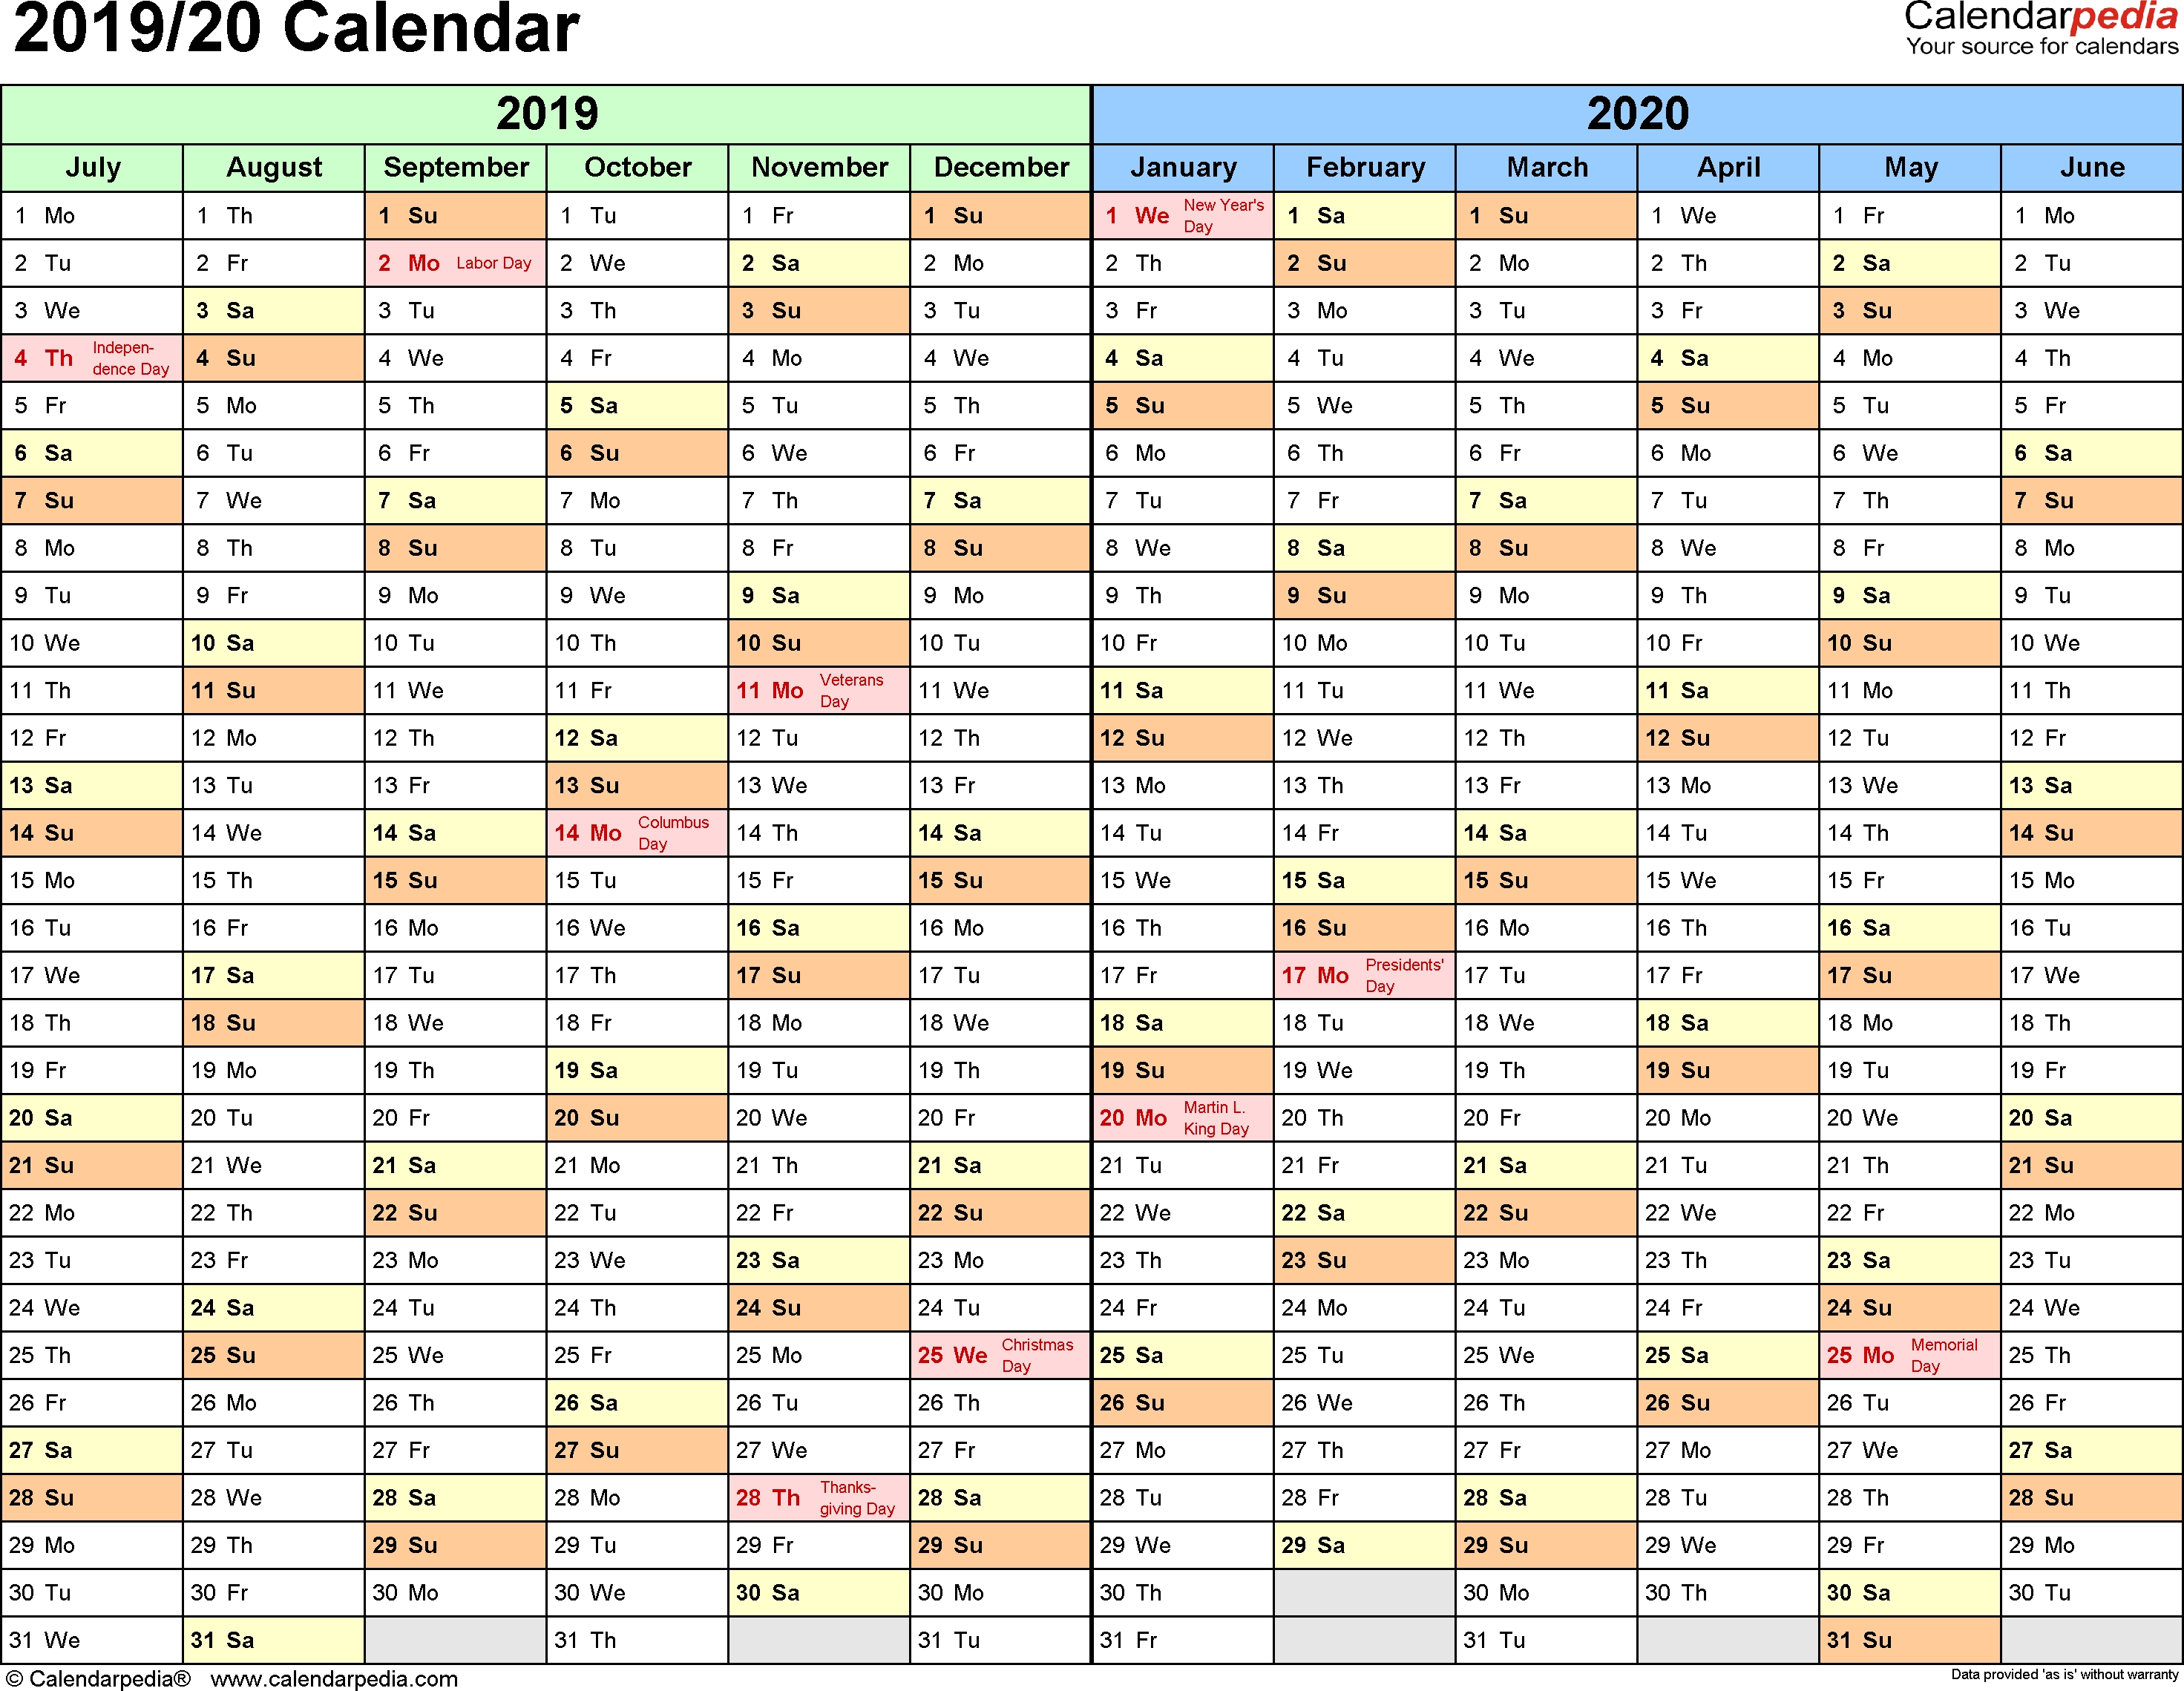 Split Year Calendars 2019/2020 (July To June) - Excel Templates Calendarpedia 2020 For South Africa